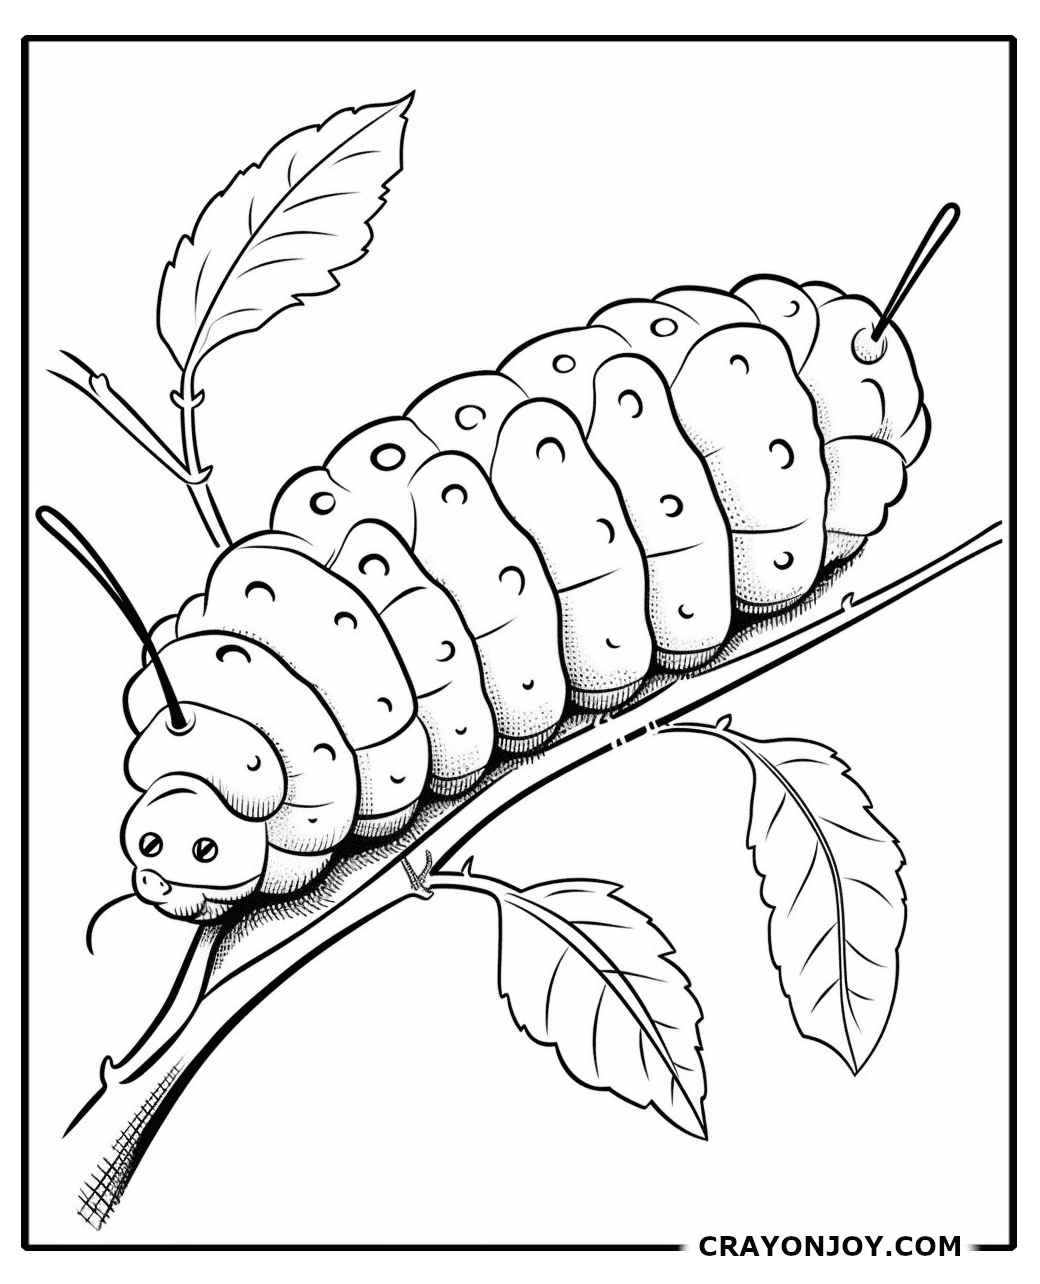 Free Printable Caterpillar Coloring Pages for Kids & Adults